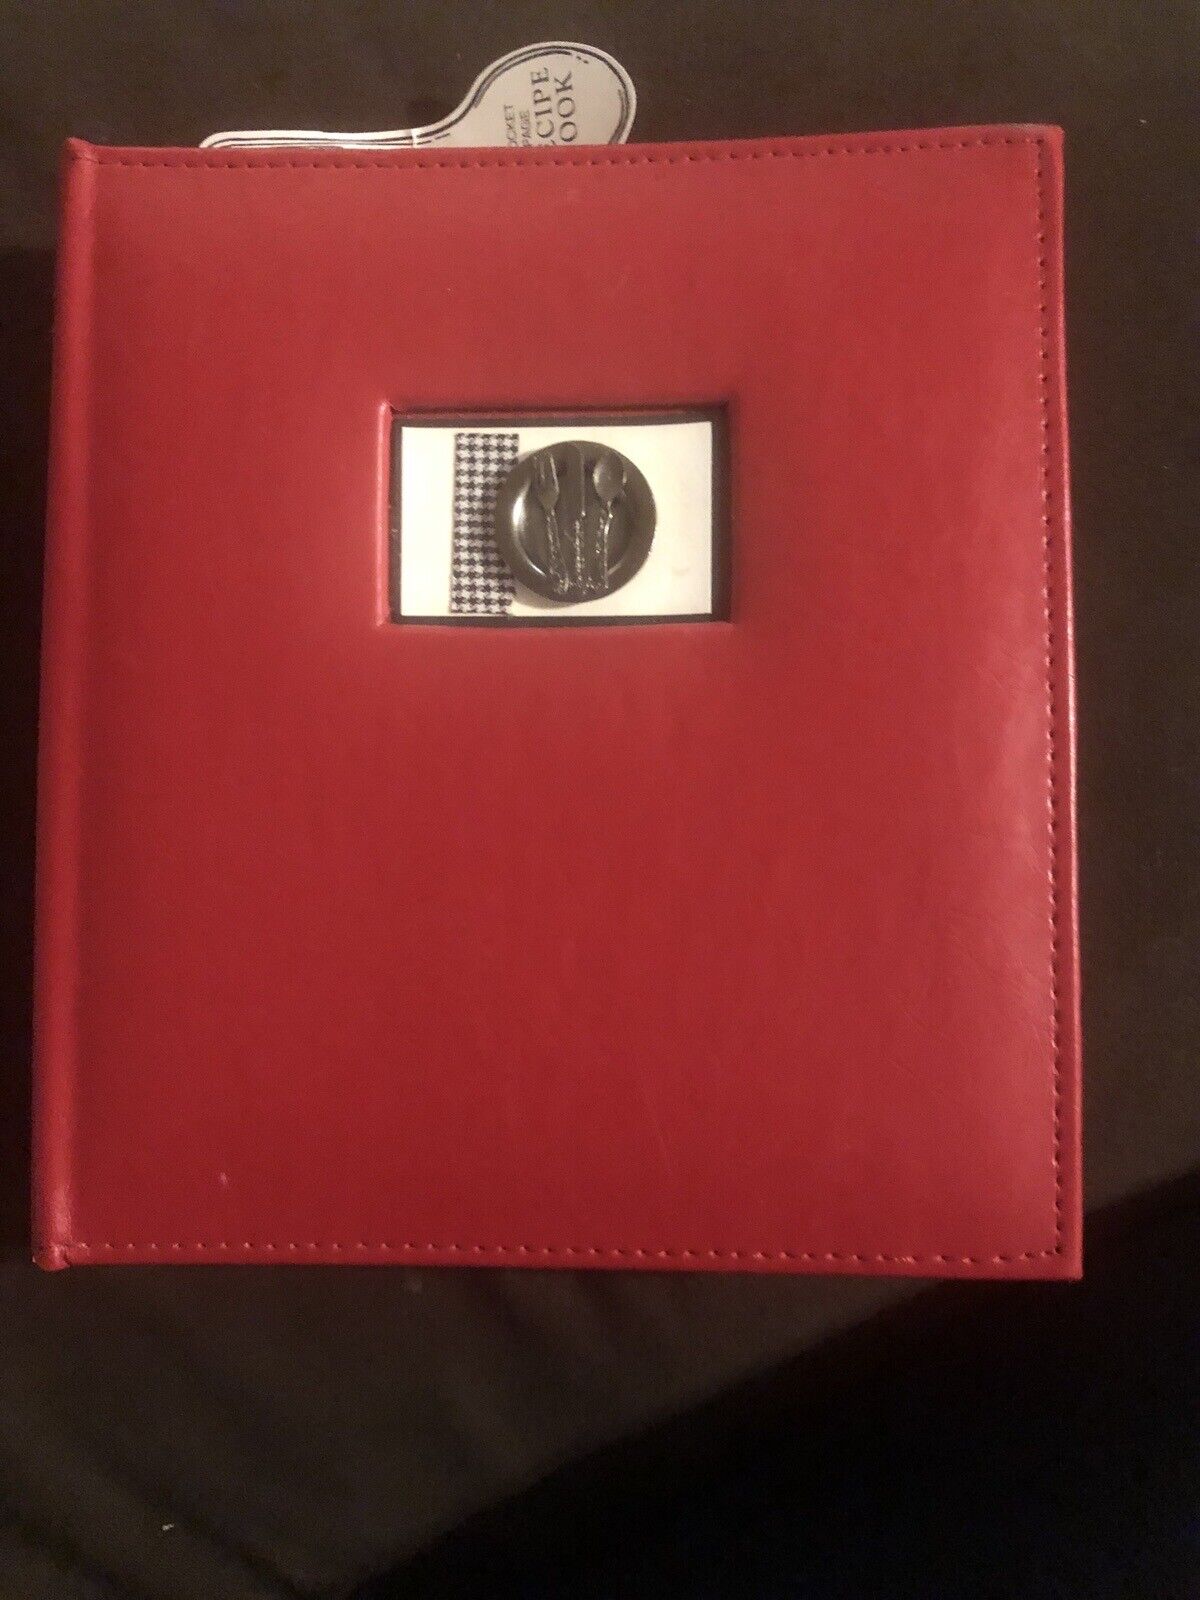 CR Gibson Bon Appetite Red Leather Bound Recipe Book 3Ring Binder Pockets Cards